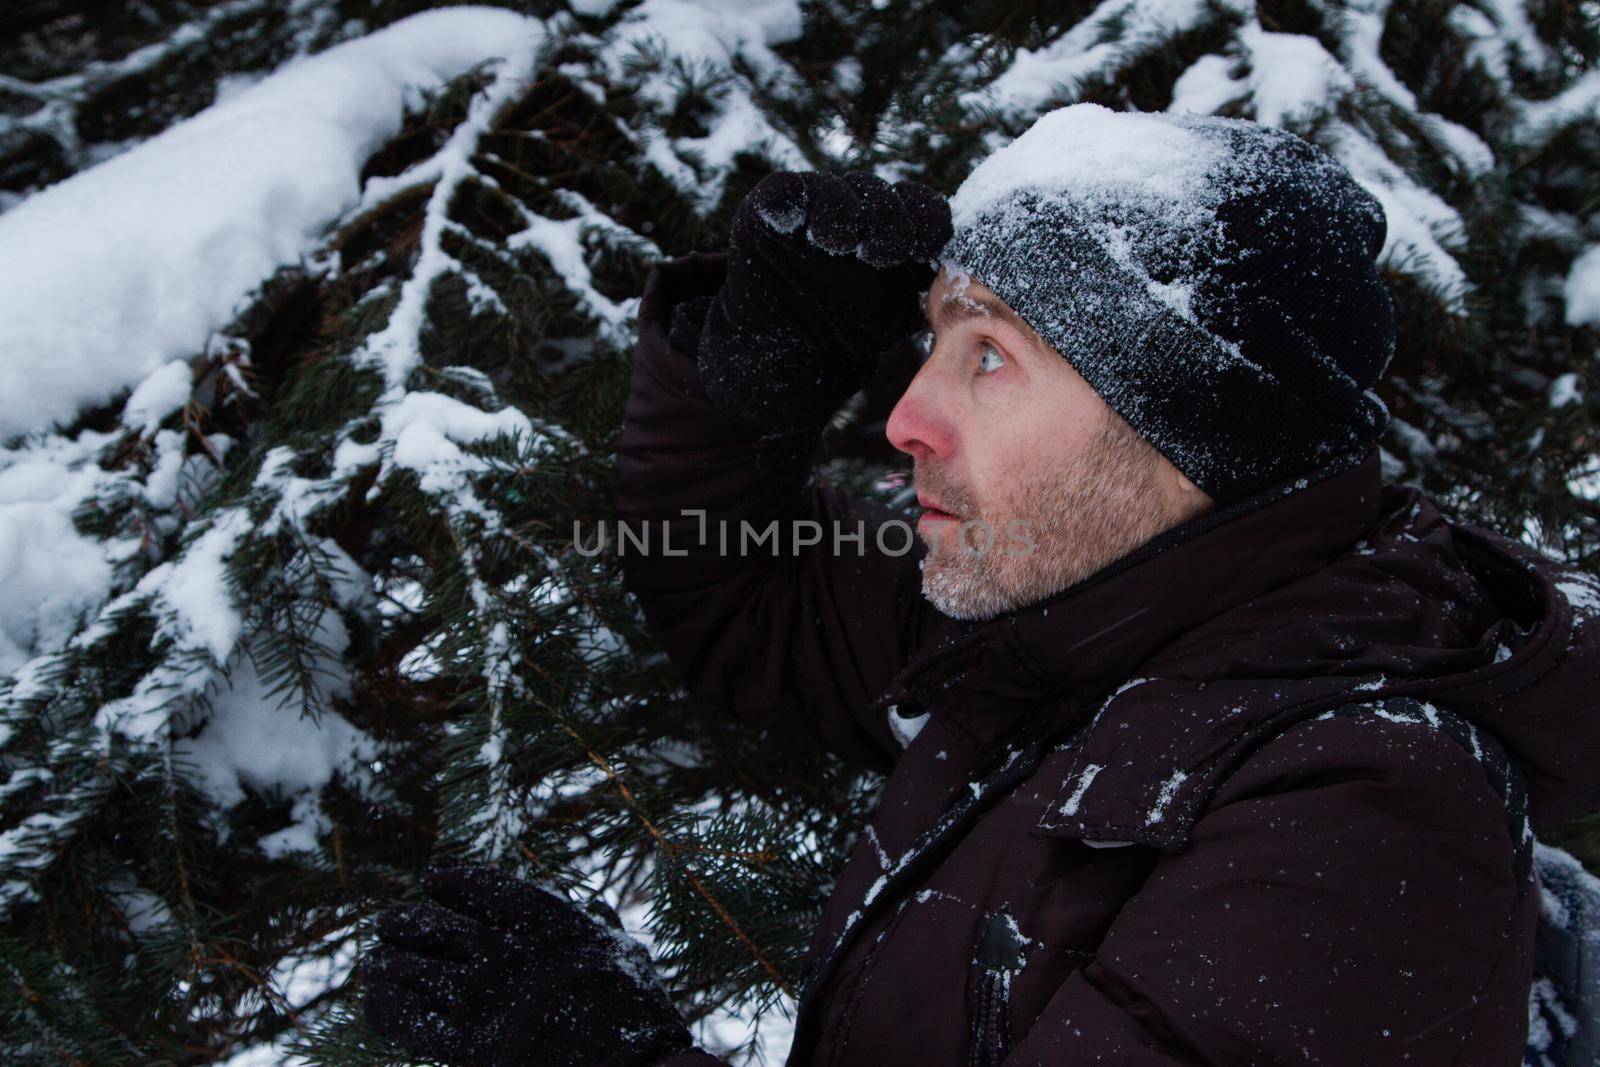 Portrait of a hiker in the woods in a snow-covered black cap near a pine tree. Portrait of a man standing in profile near a green spruce branch covered in snow.